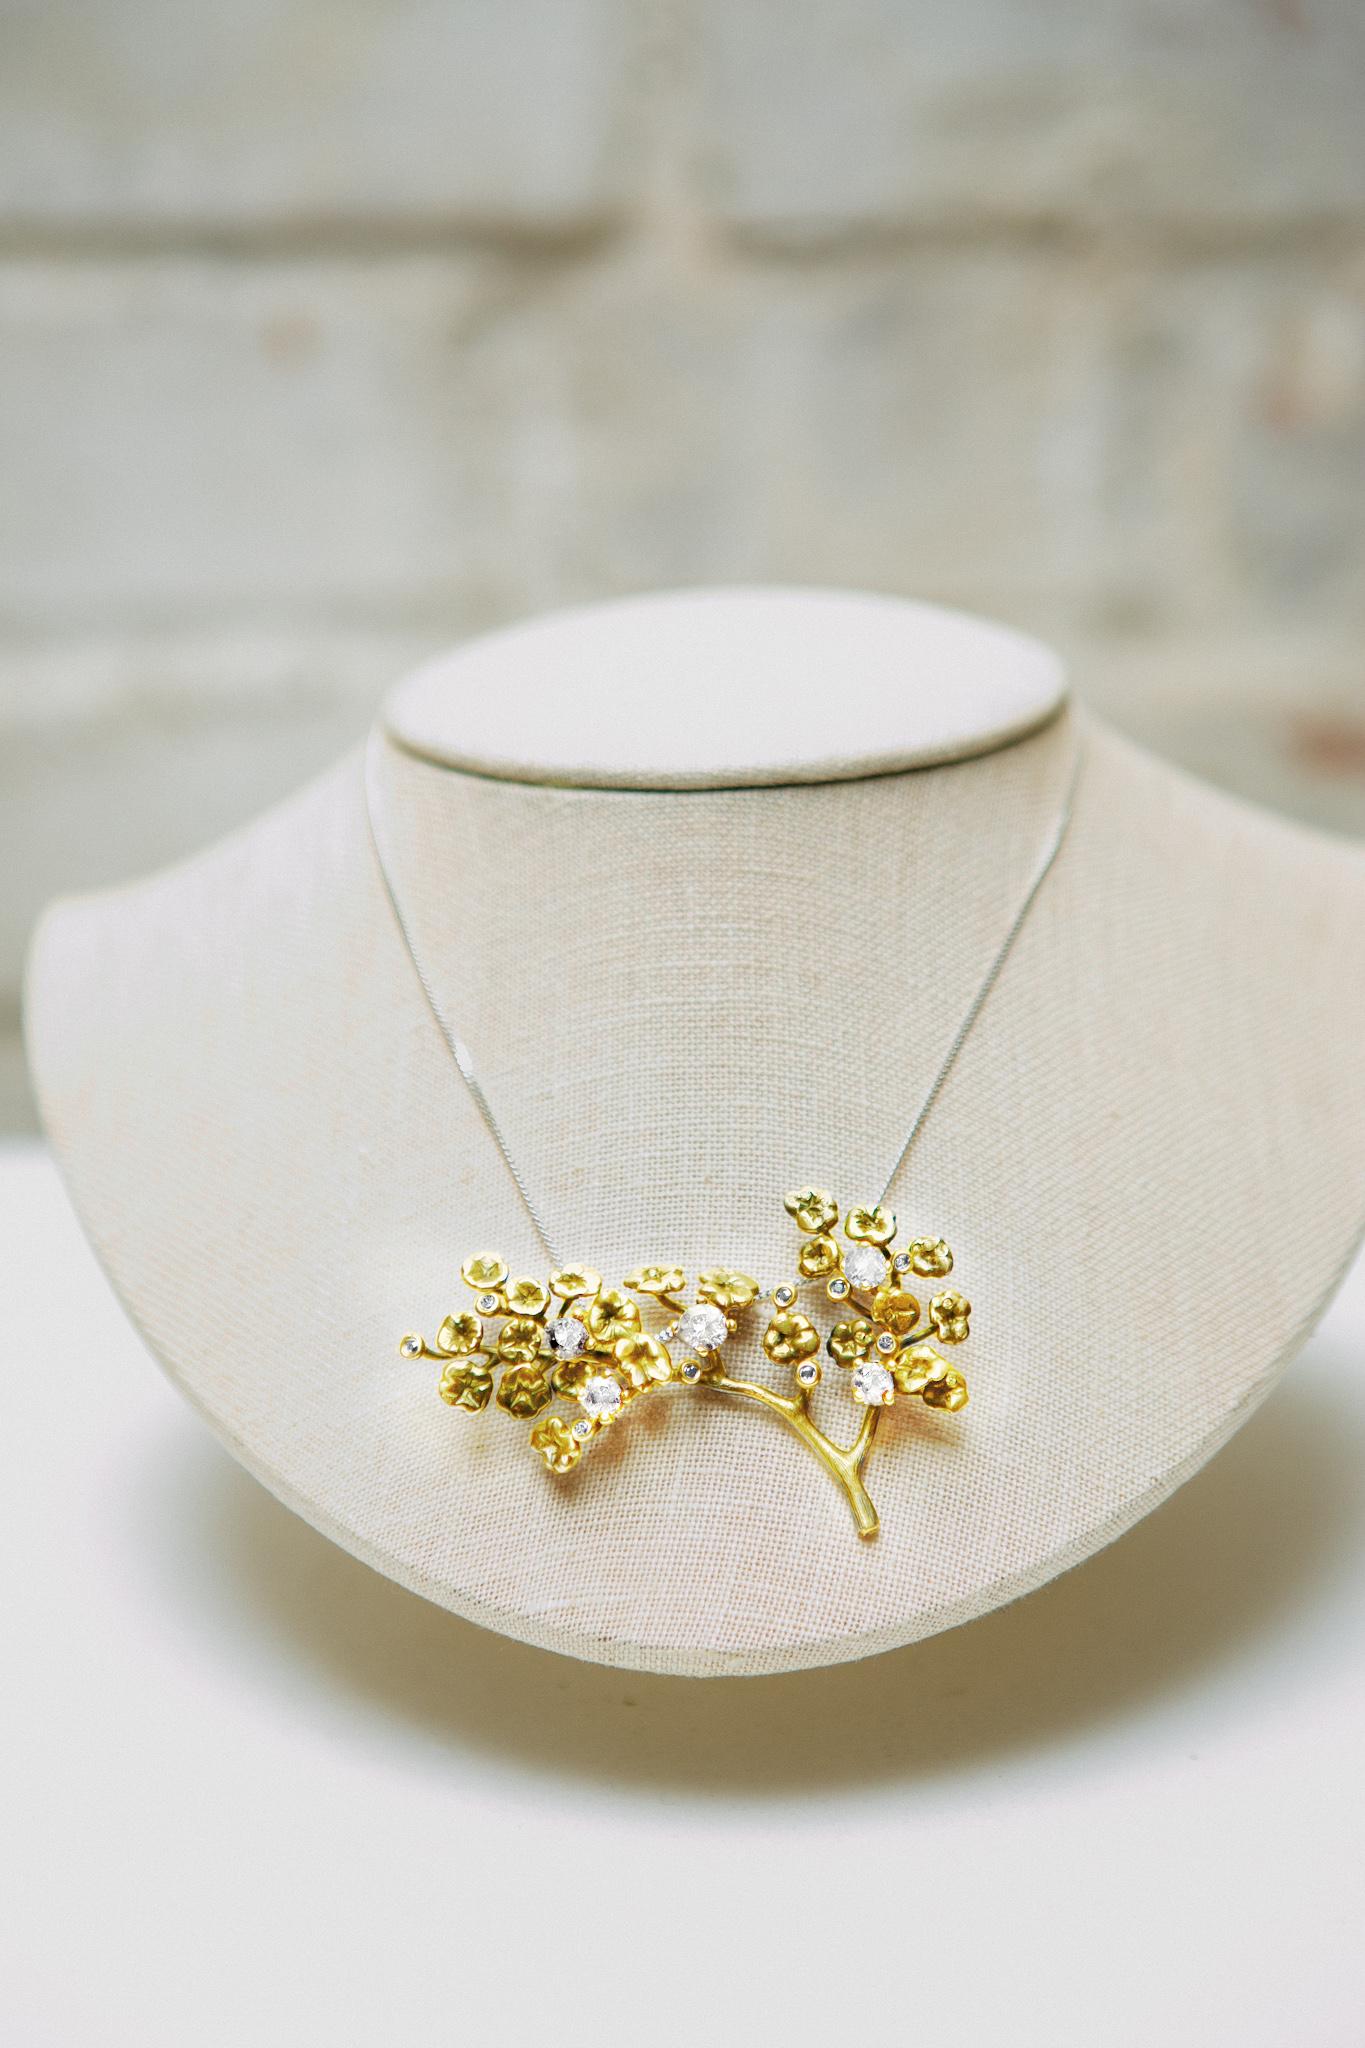 This 7 cm long Heliotrope Blossom necklace in 18 karat yellow gold is a stunning work of art designed by Berlin-based oil painter Polya Medvedeva. Encrusted with 40 diamonds totaling 5.1 carats, this limited edition piece is truly unique, and can be